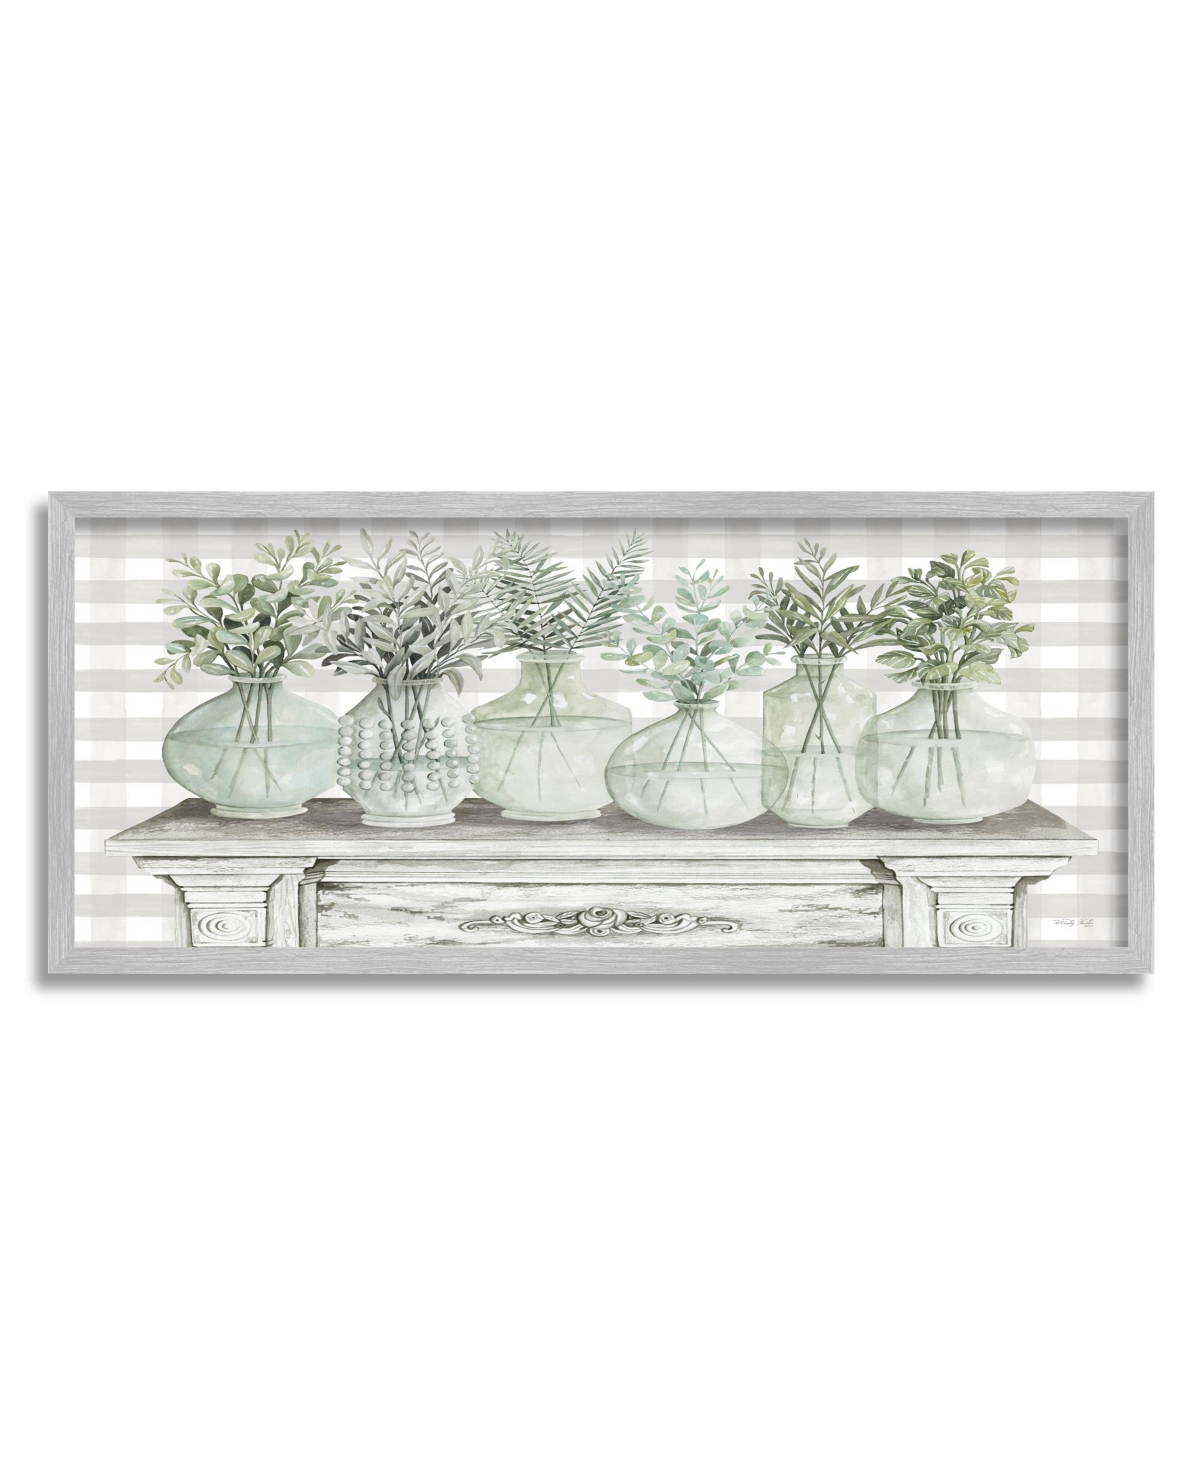 Stupell Industries Country Plant Herb Jars Framed Giclee Art, 10" X 1.5" X 24" In Multi-color